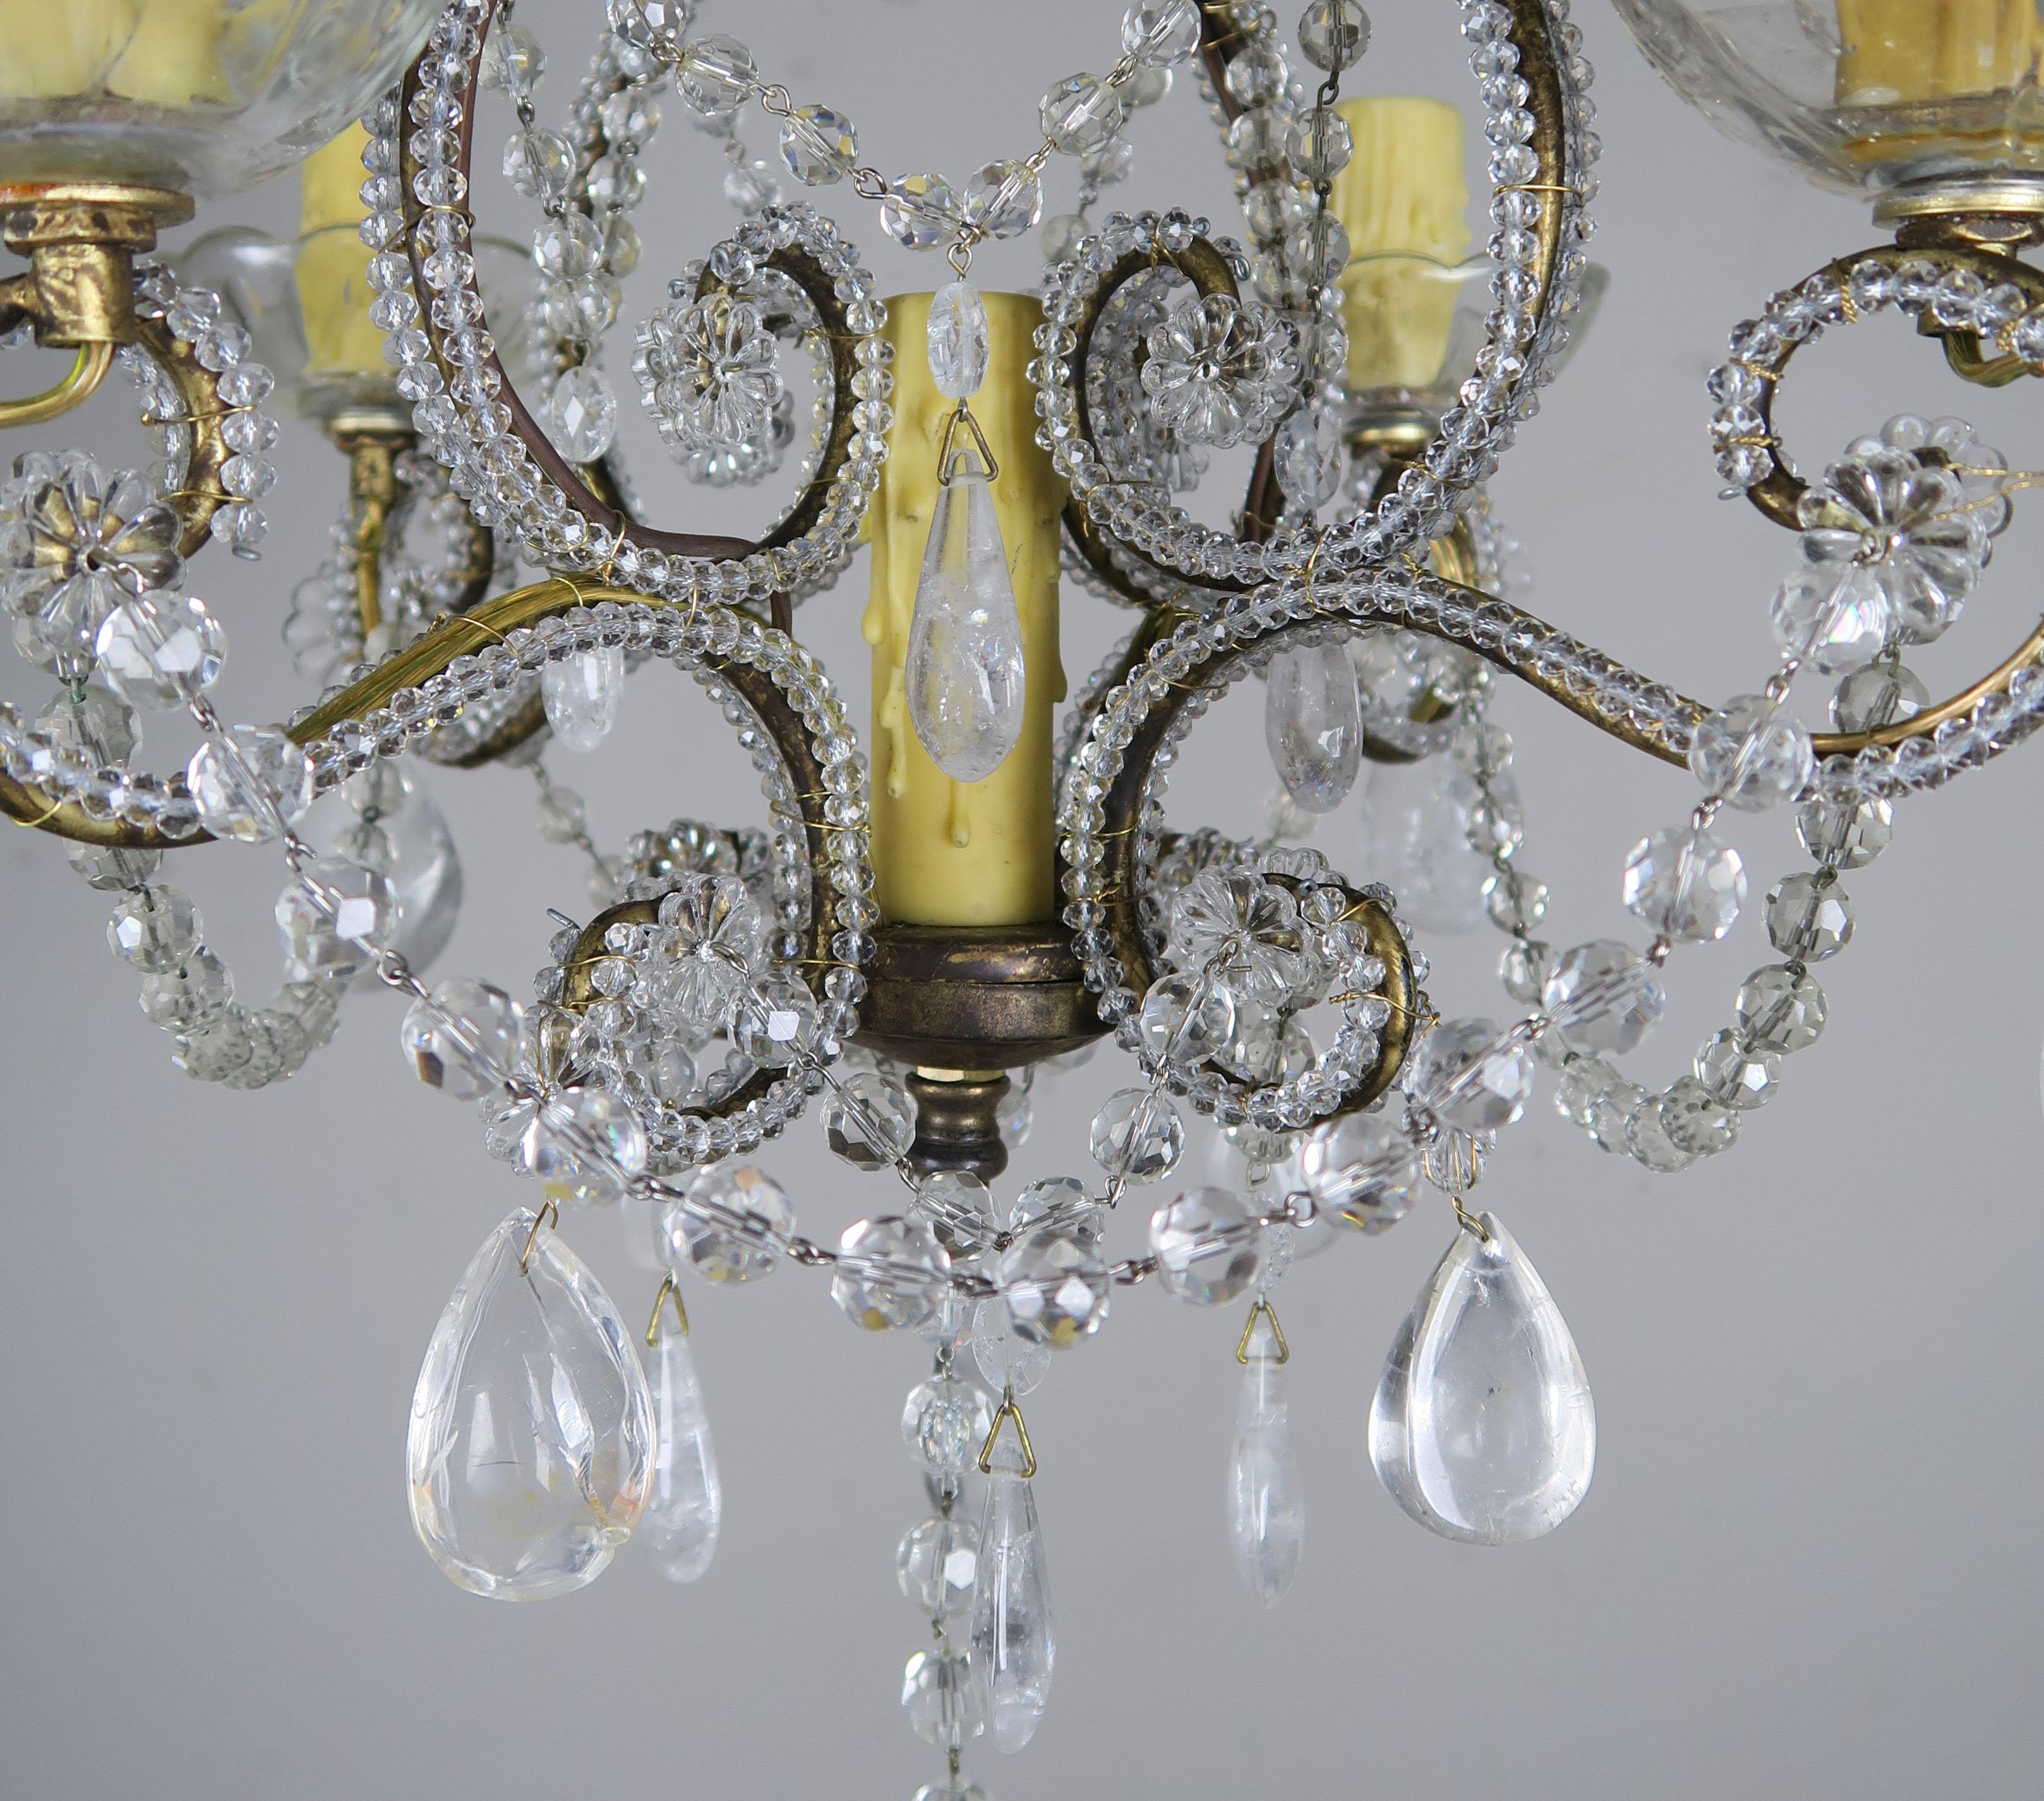 4-light Italian crystal beaded chandelier adorned with almond rock crystals throughout. The fixture is newly rewired with tallow colored drip wax candle covers. Includes chain and canopy.